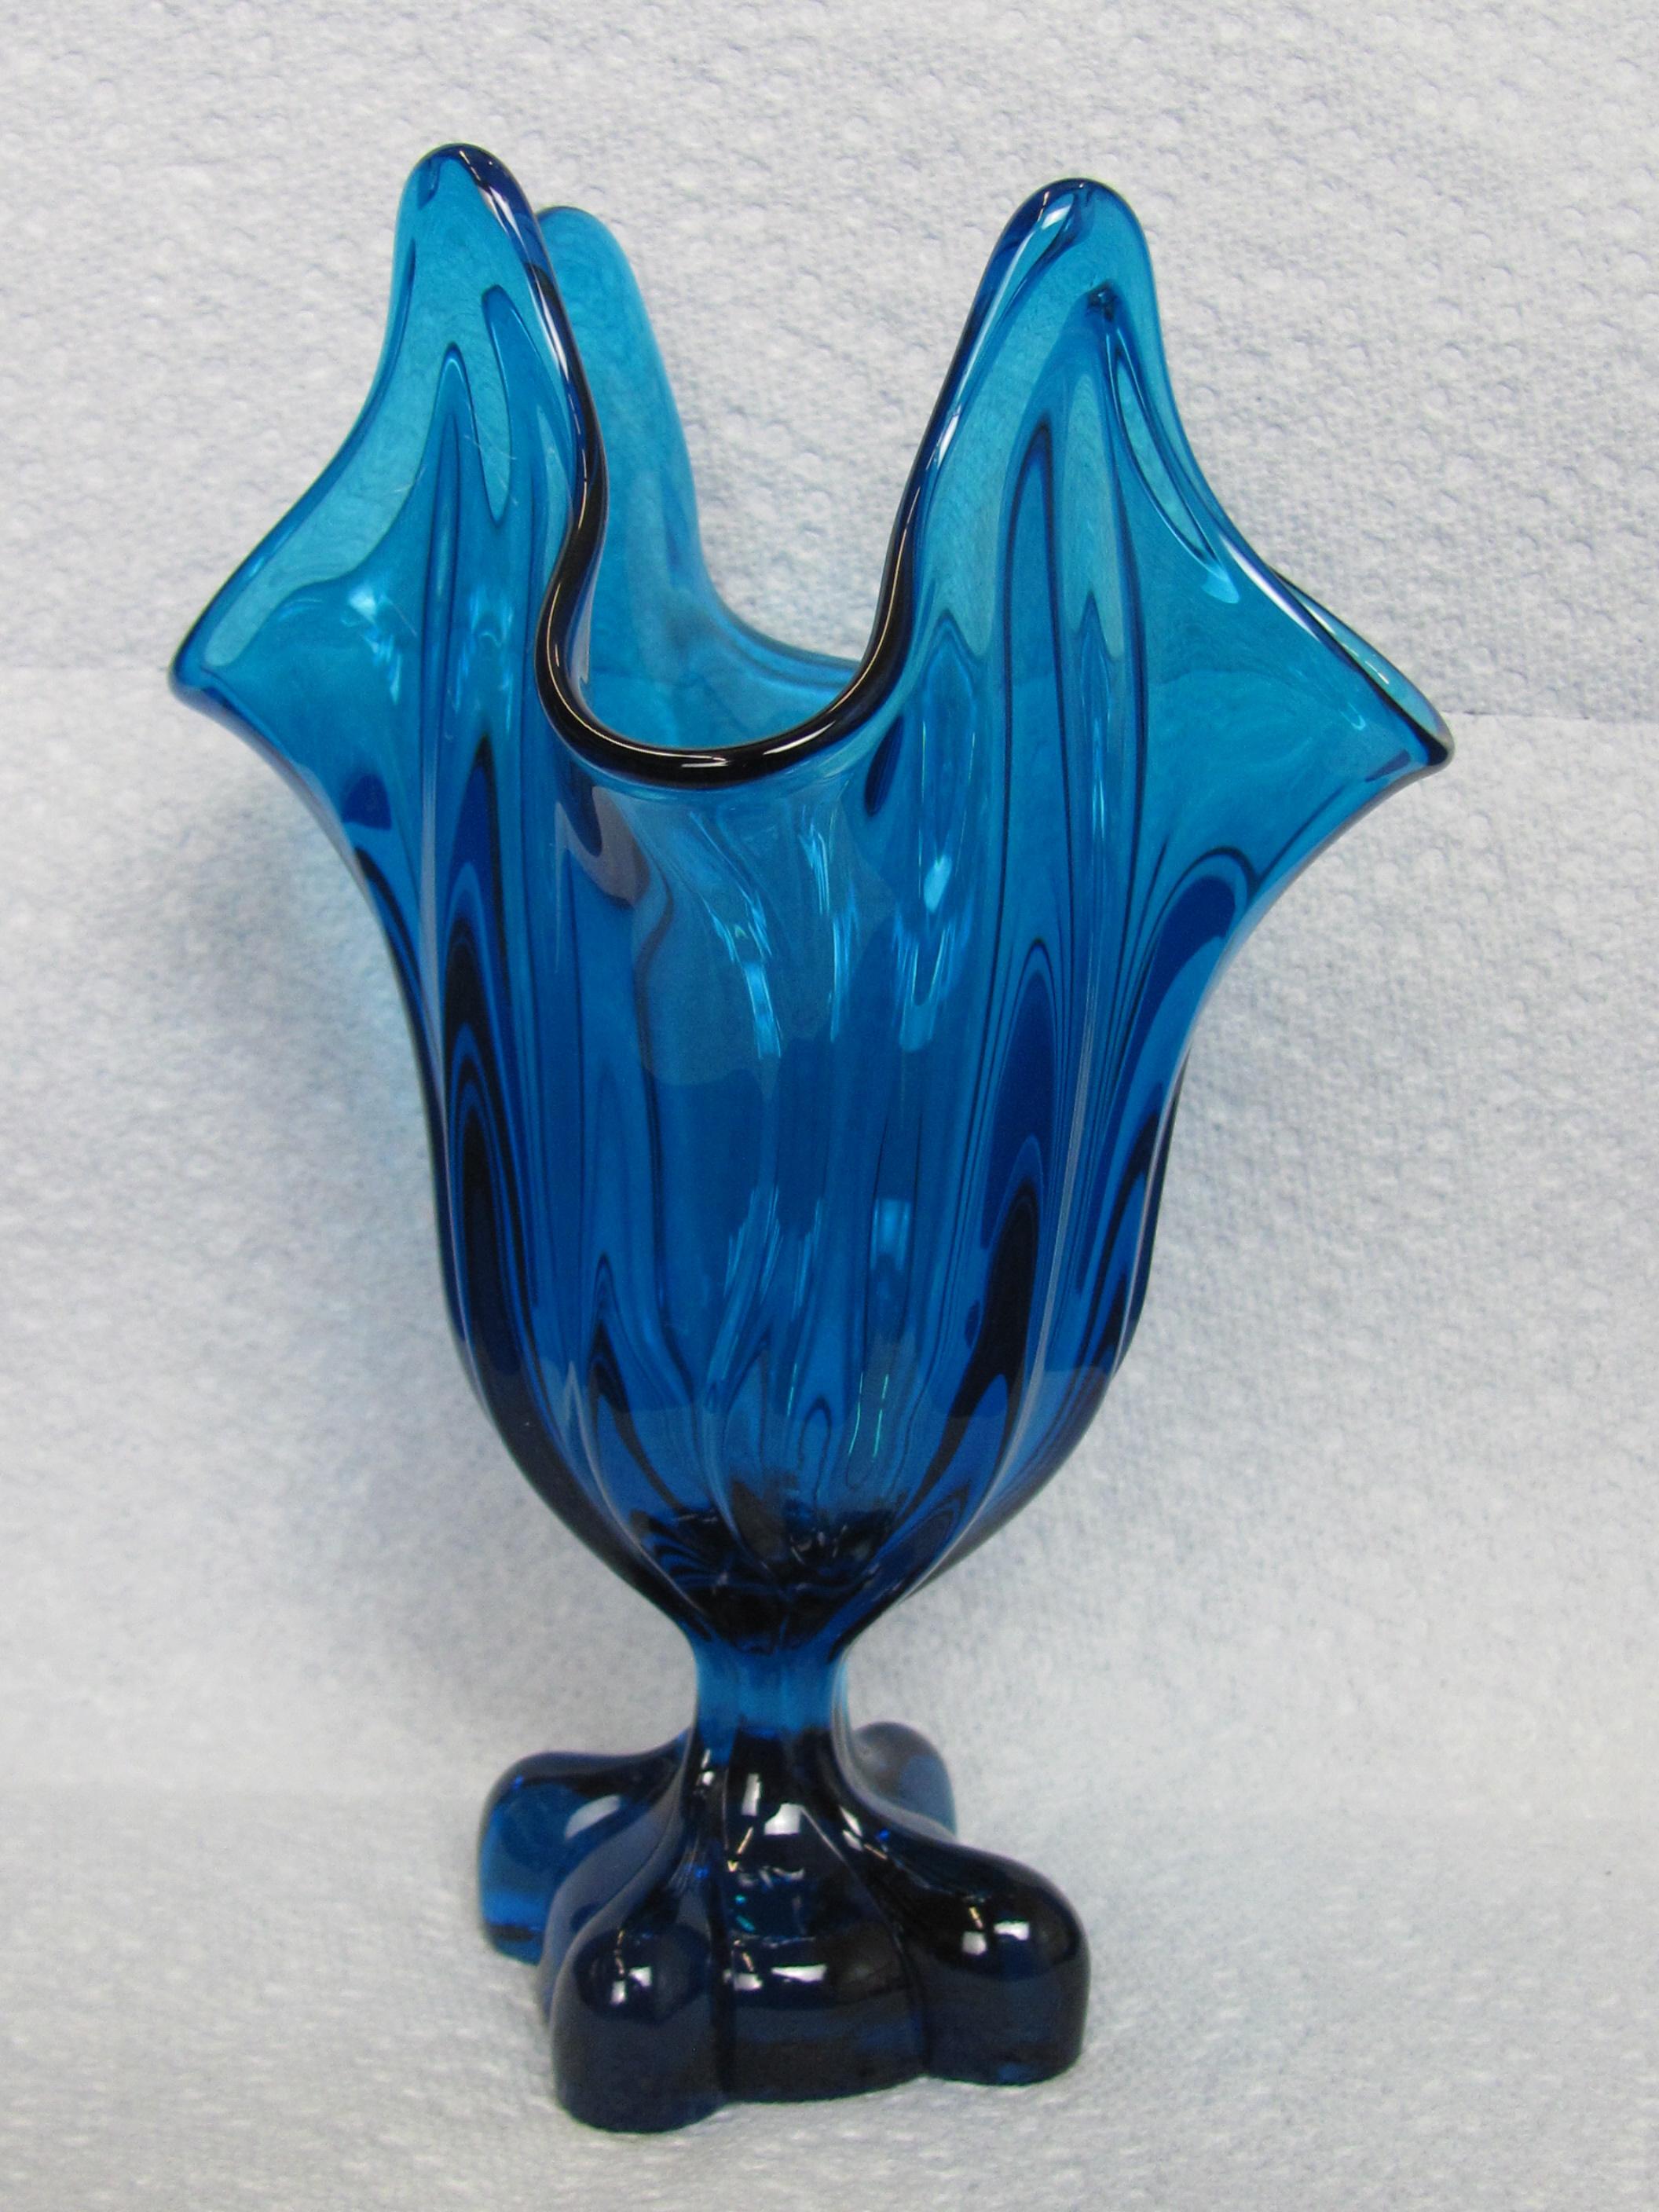 Viking Glass Handkerchief Vase in Bluenique – About 7 1/2” tall